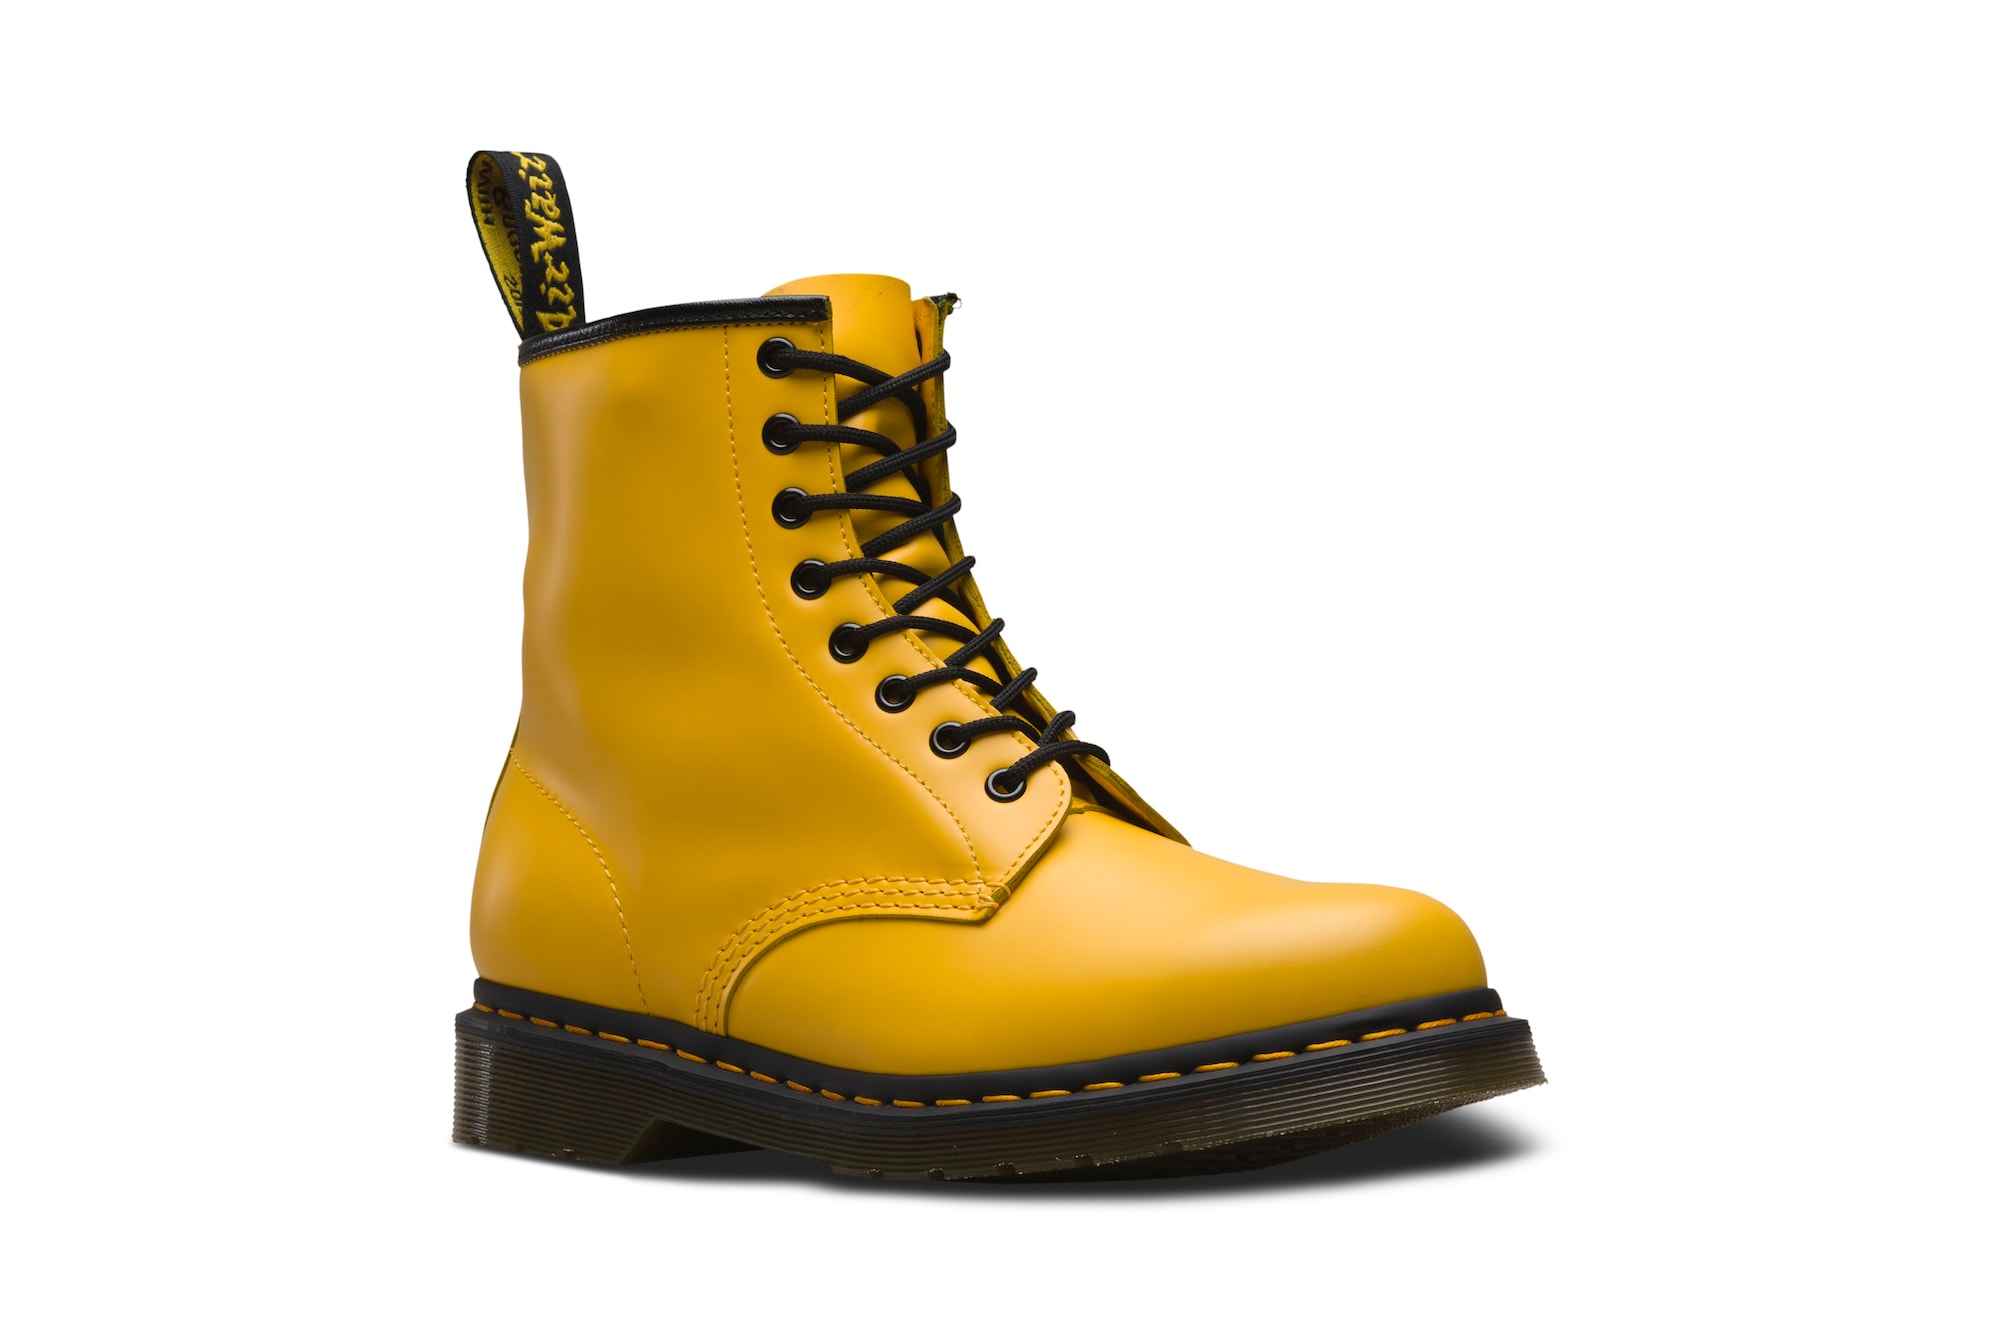 Dr. Martens Spring/Summer 1460 Boot Pink Yellow White Orange Vibrant Pastel Boots Shoes Footwear